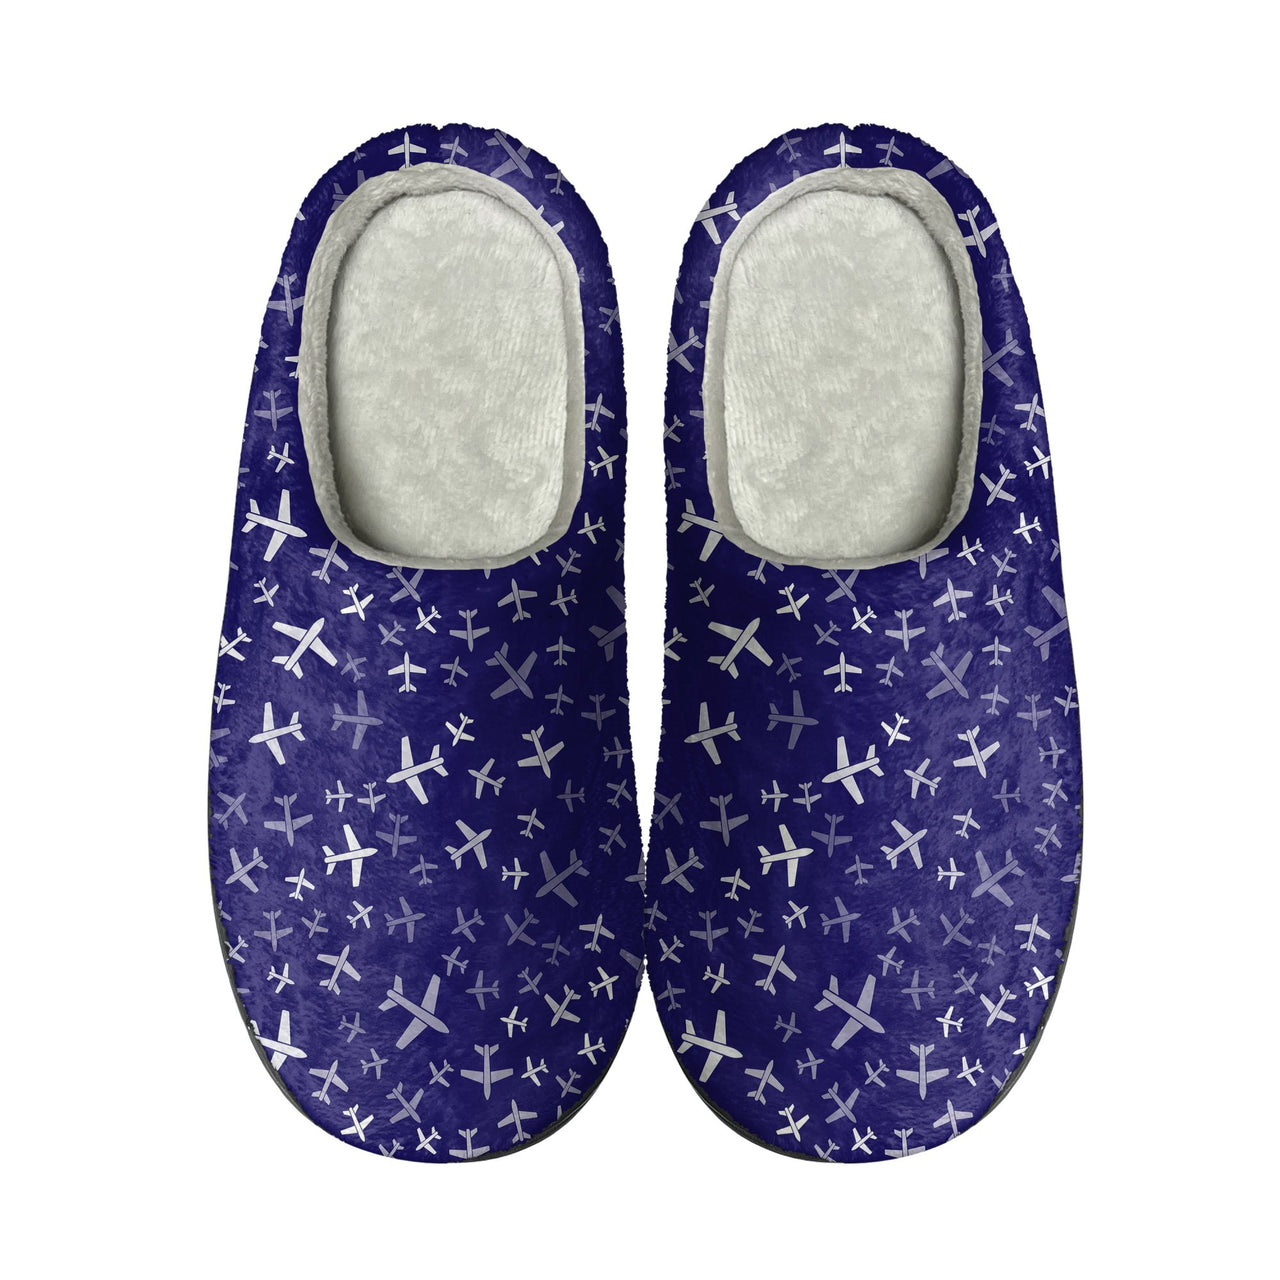 Different Sizes Seamless Airplanes Designed Cotton Slippers